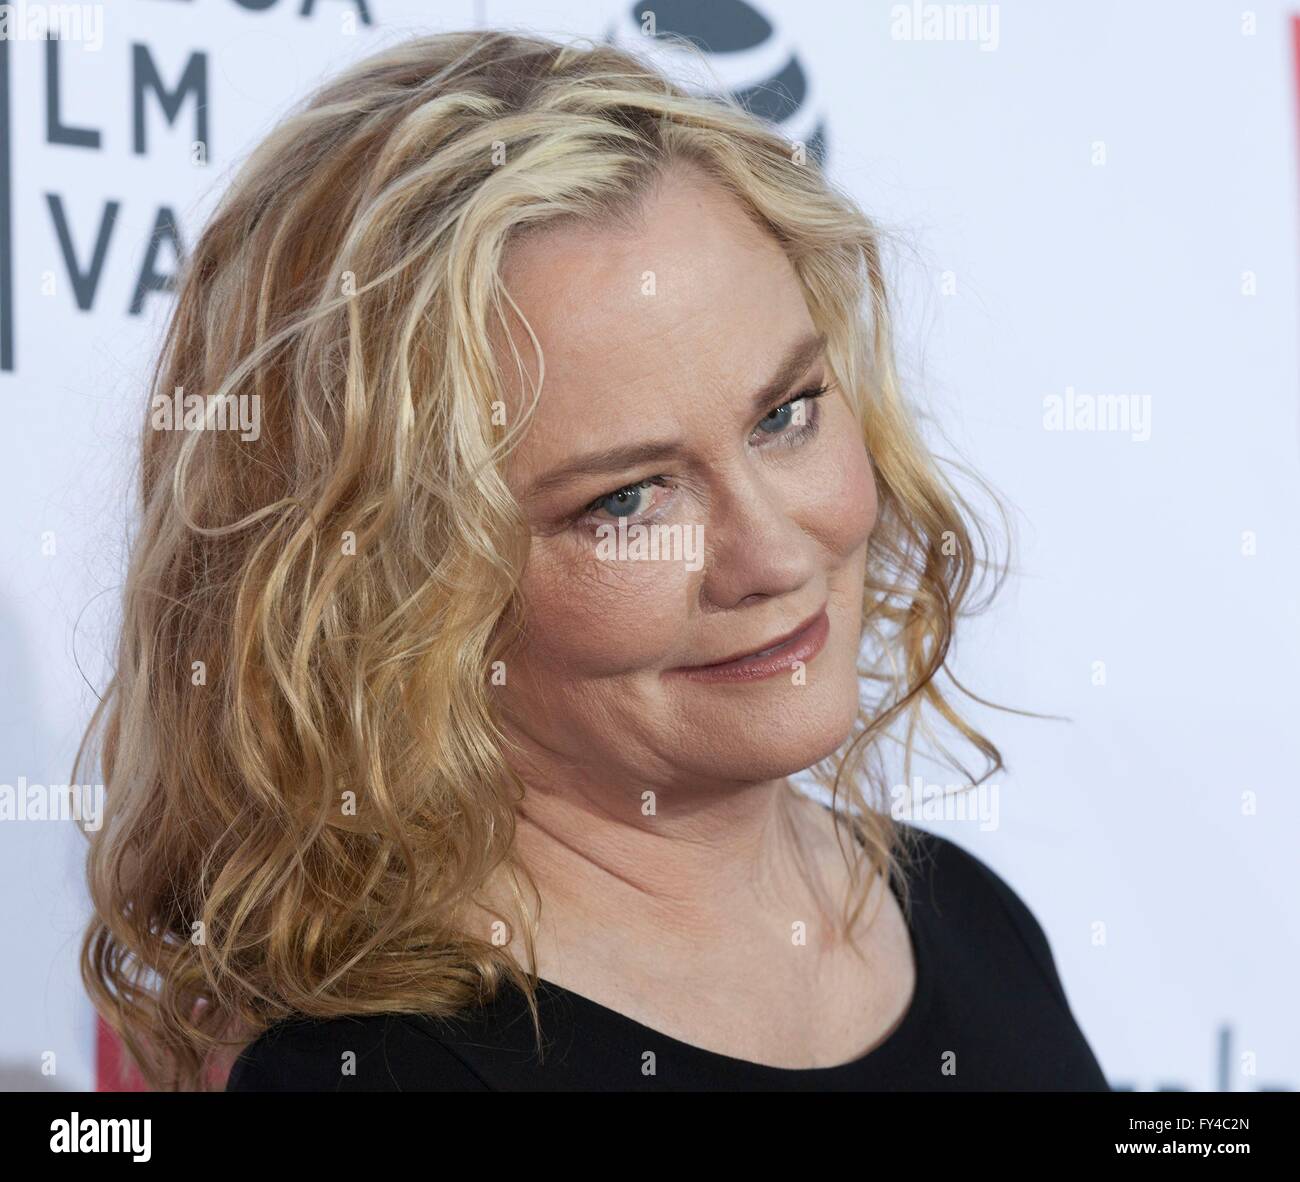 New York, NY, USA. 21st Apr, 2016. Cybill Shepherd at arrivals for TAXI DRIVER Special Screening at 2016 Tribeca Film Festival, Beacon Theatre, New York, NY April 21, 2016. Credit:  Lev Radin/Everett Collection/Alamy Live News Stock Photo